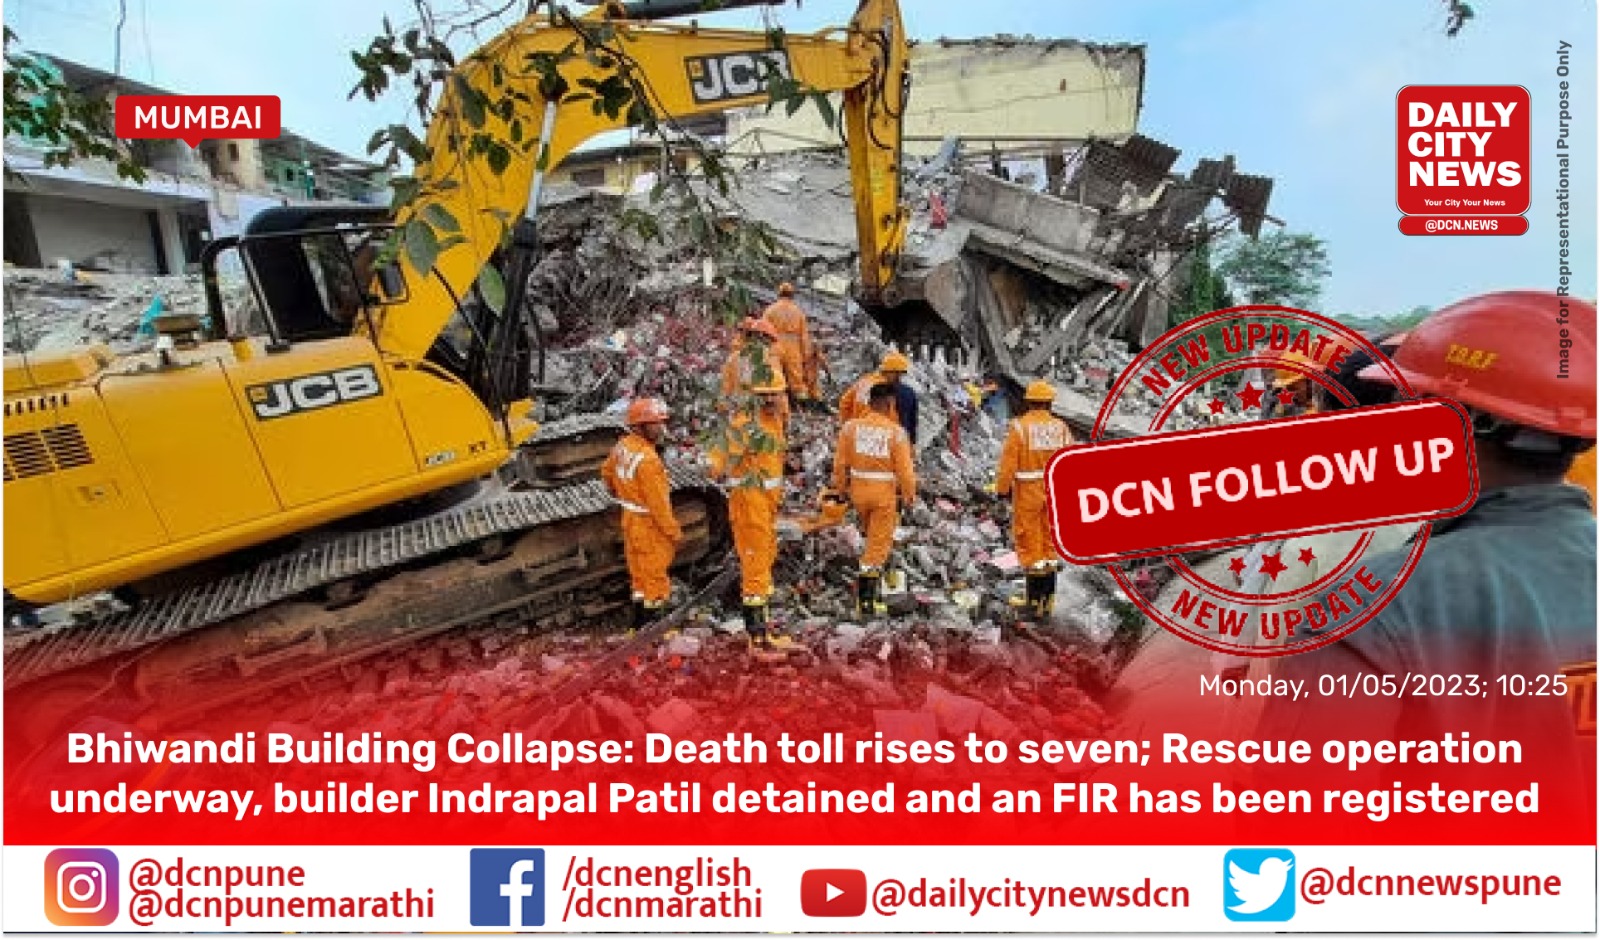 Bhiwandi Building Collapse: Death toll rises to seven; Rescue operation underway, builder Indrapal Patil detained and an FIR has been registered